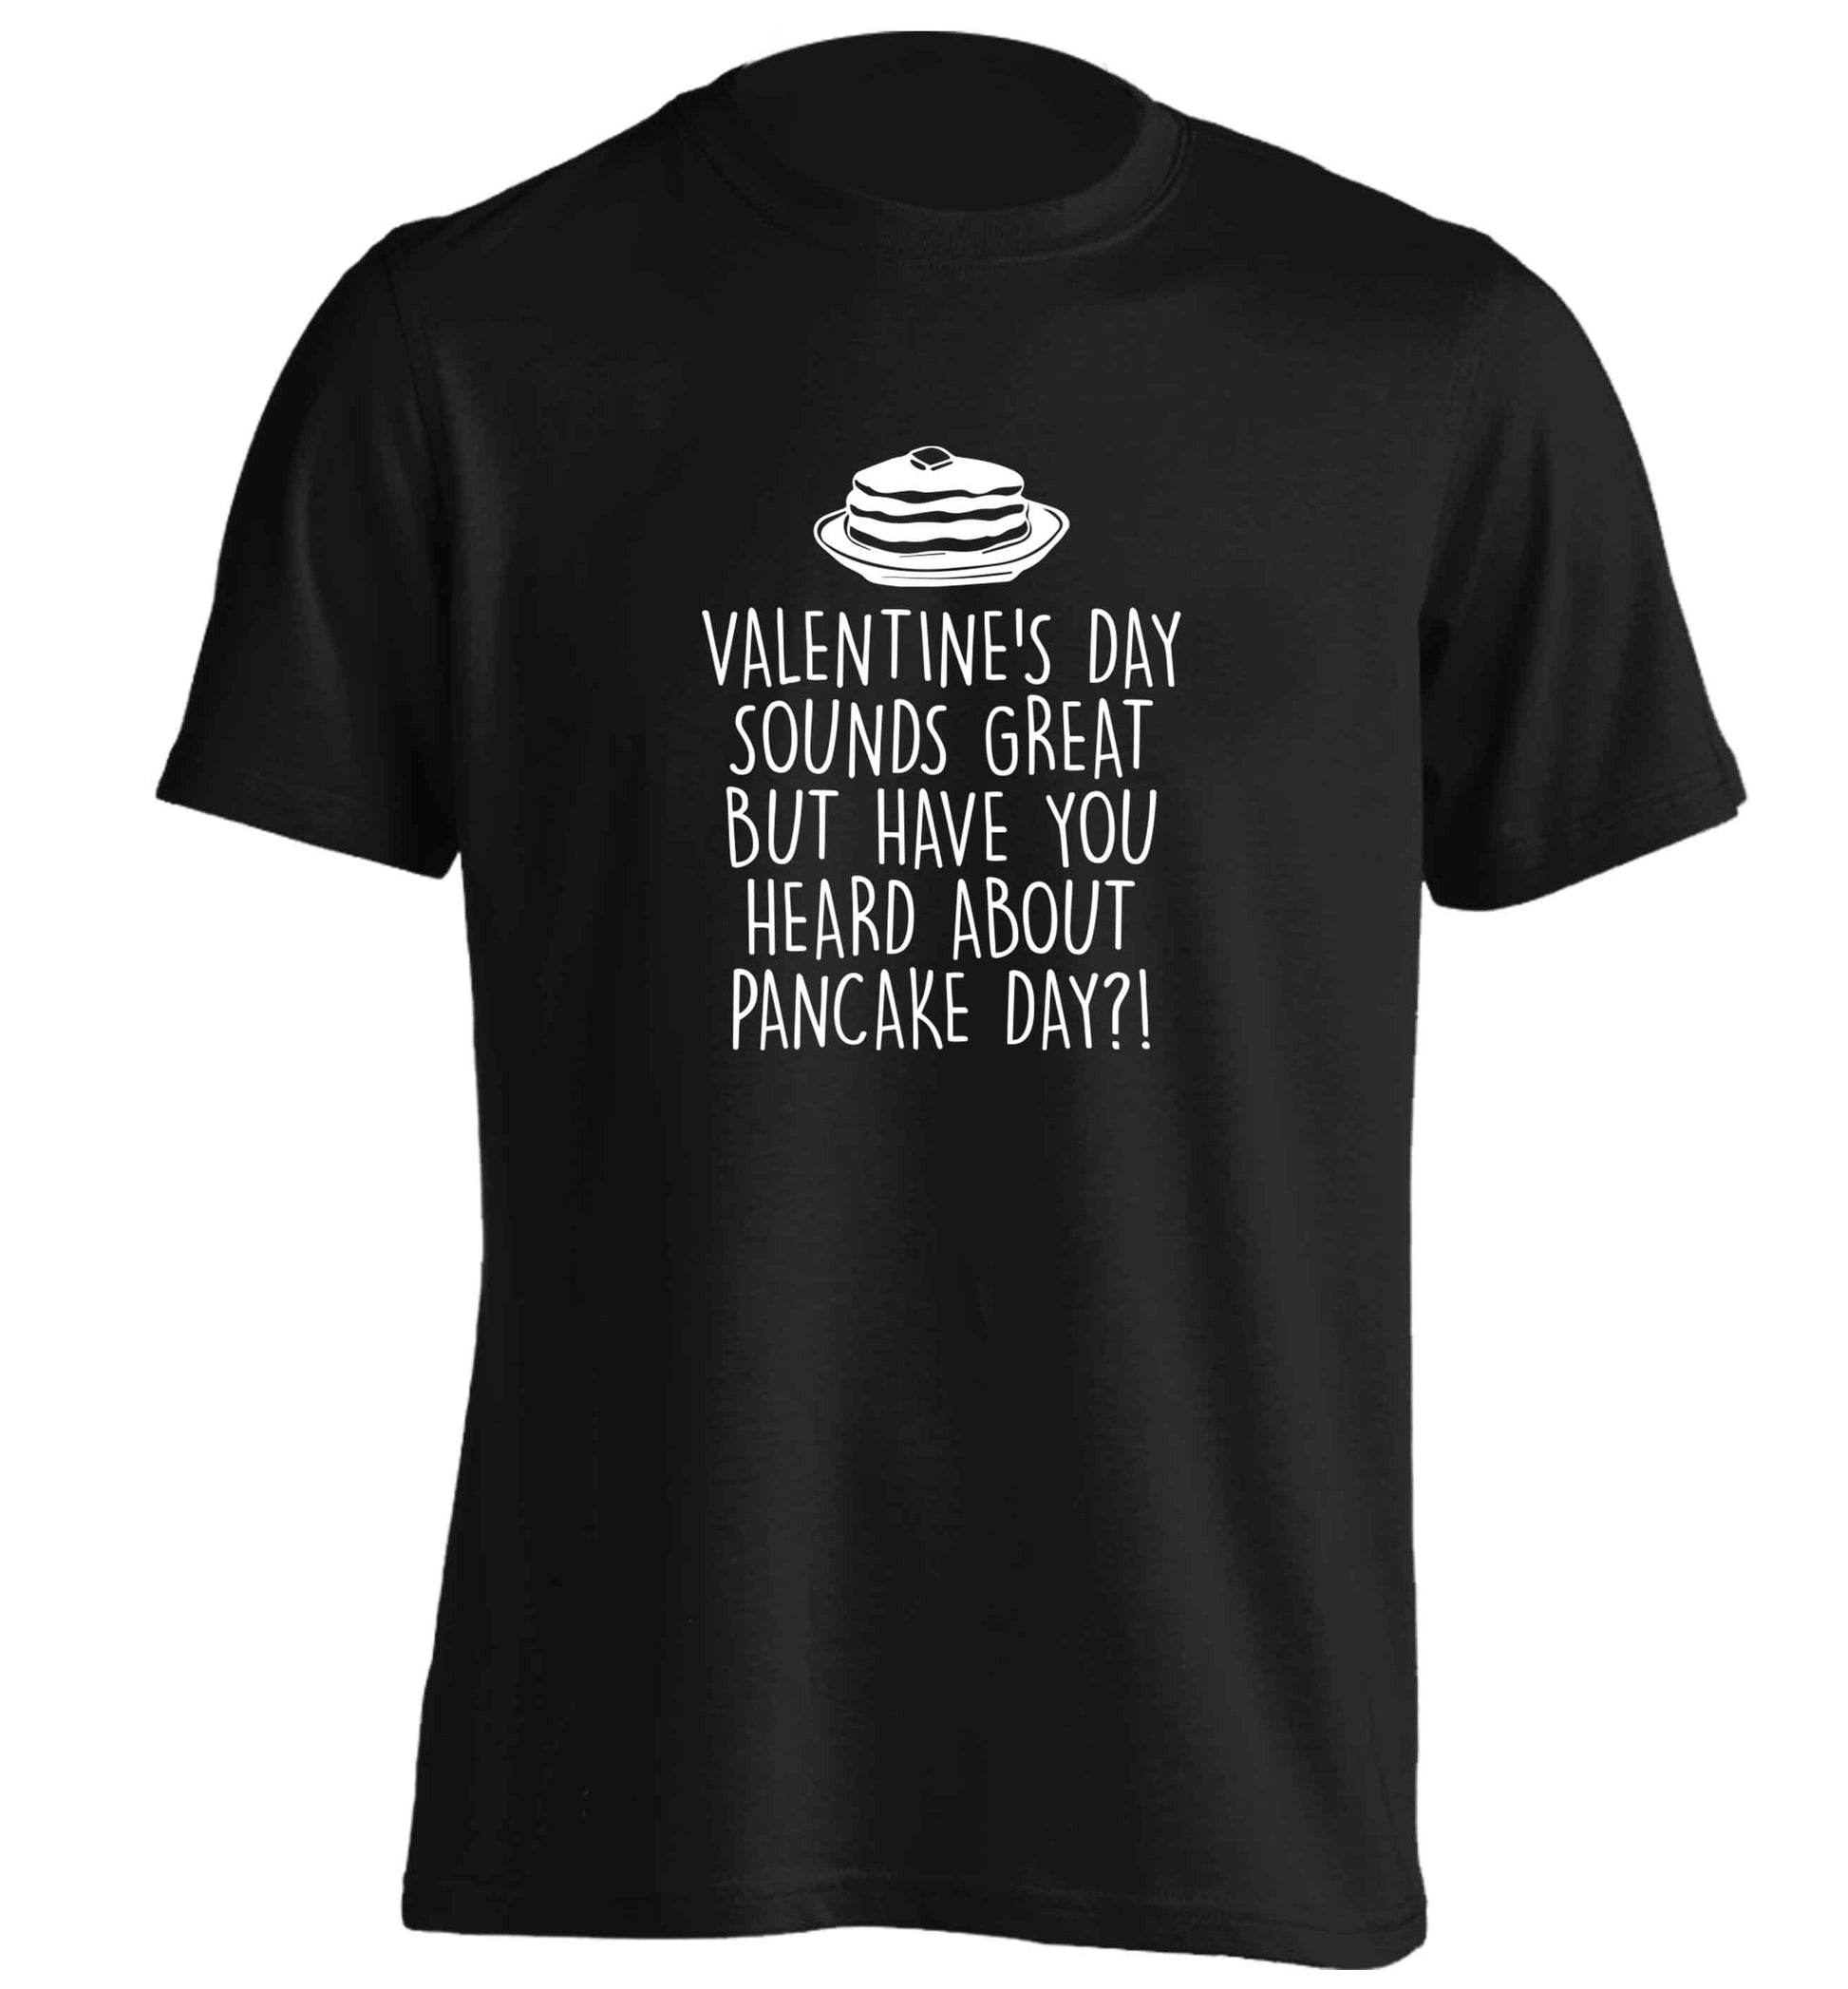 Valentine's day sounds great but have you heard about pancake day?! adults unisex black Tshirt 2XL